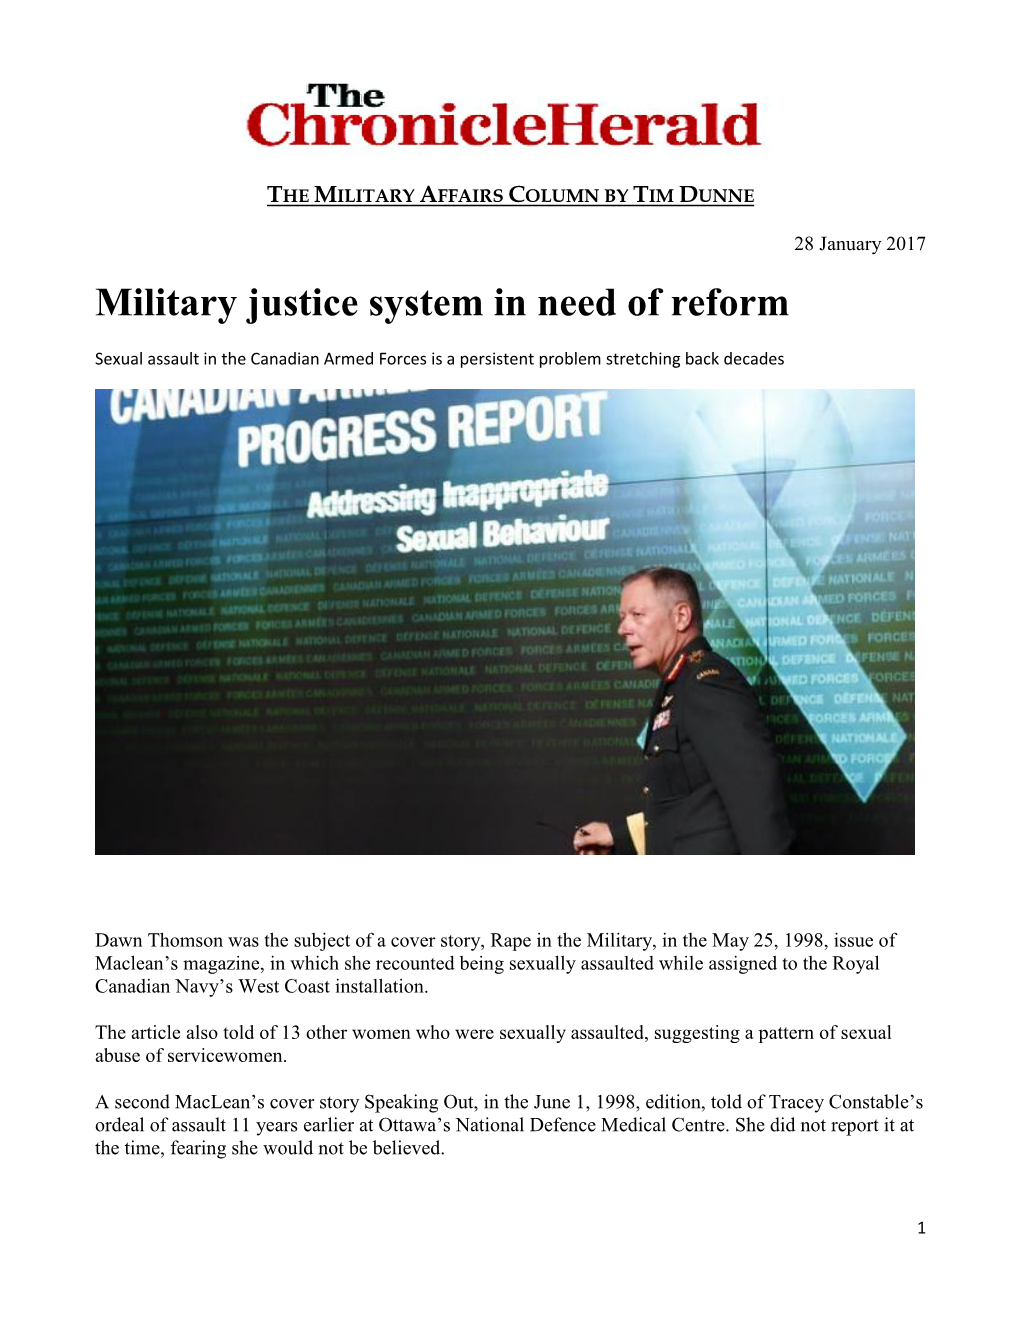 Military Justice System in Need of Reform